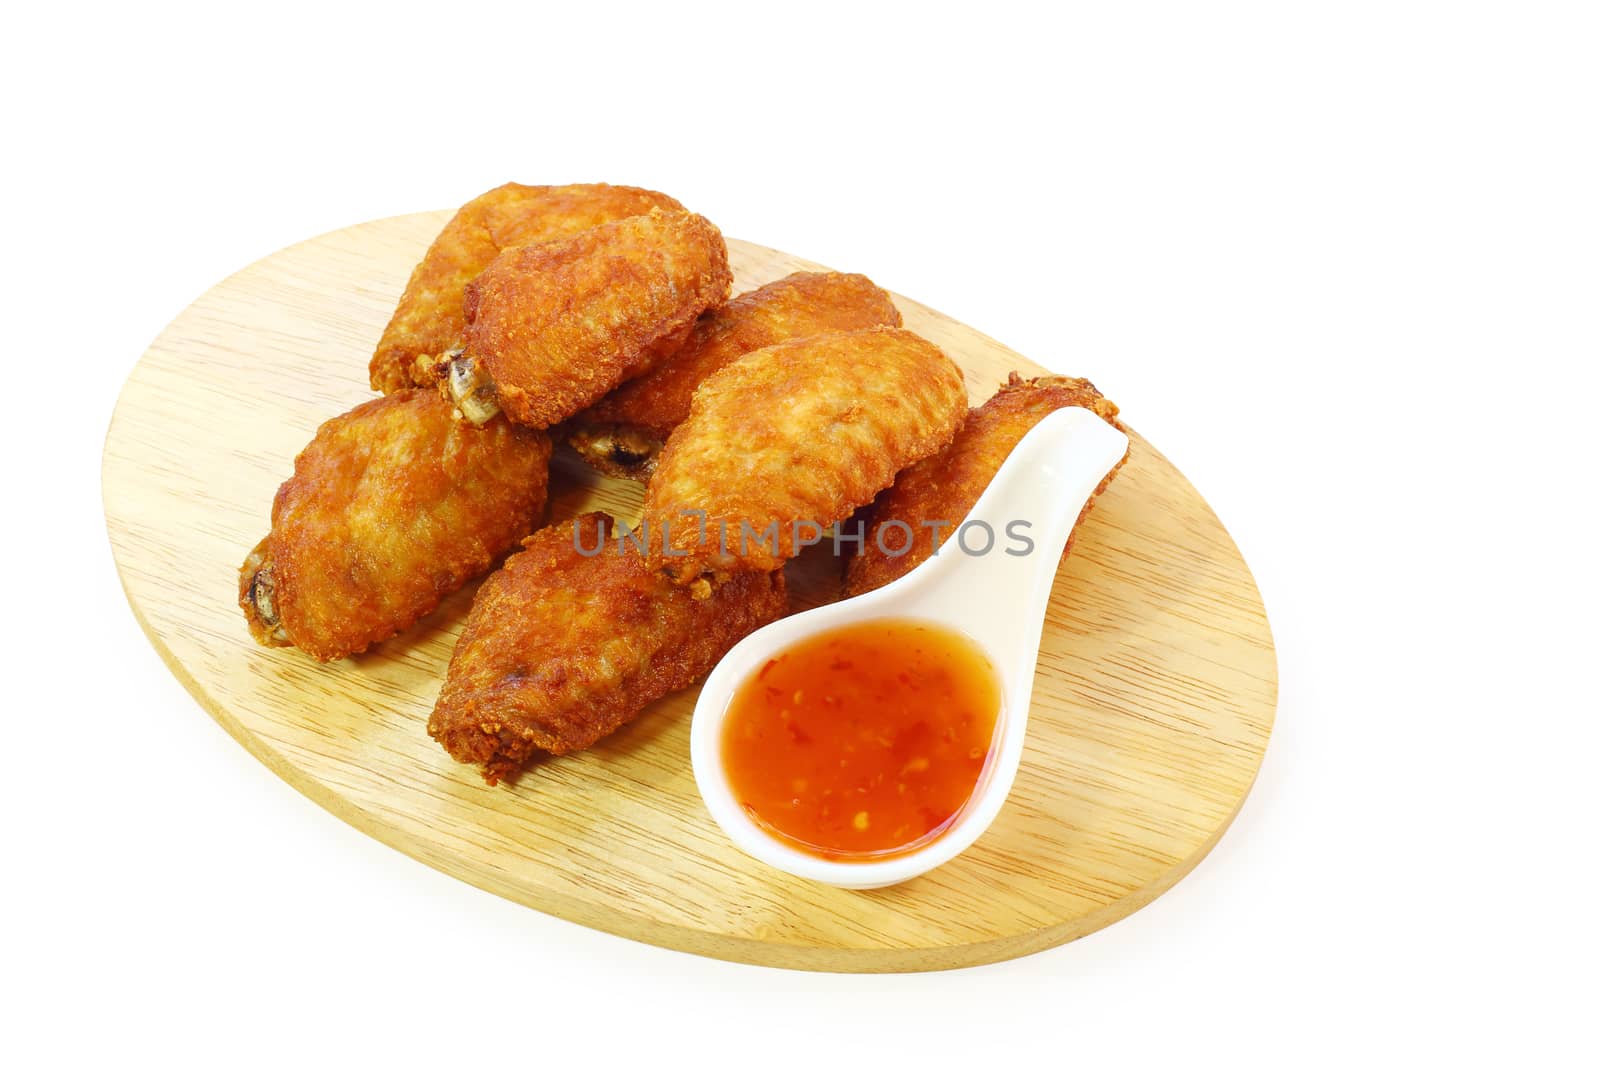 Fried chicken wings with sauce isolated on white background, clipping path.